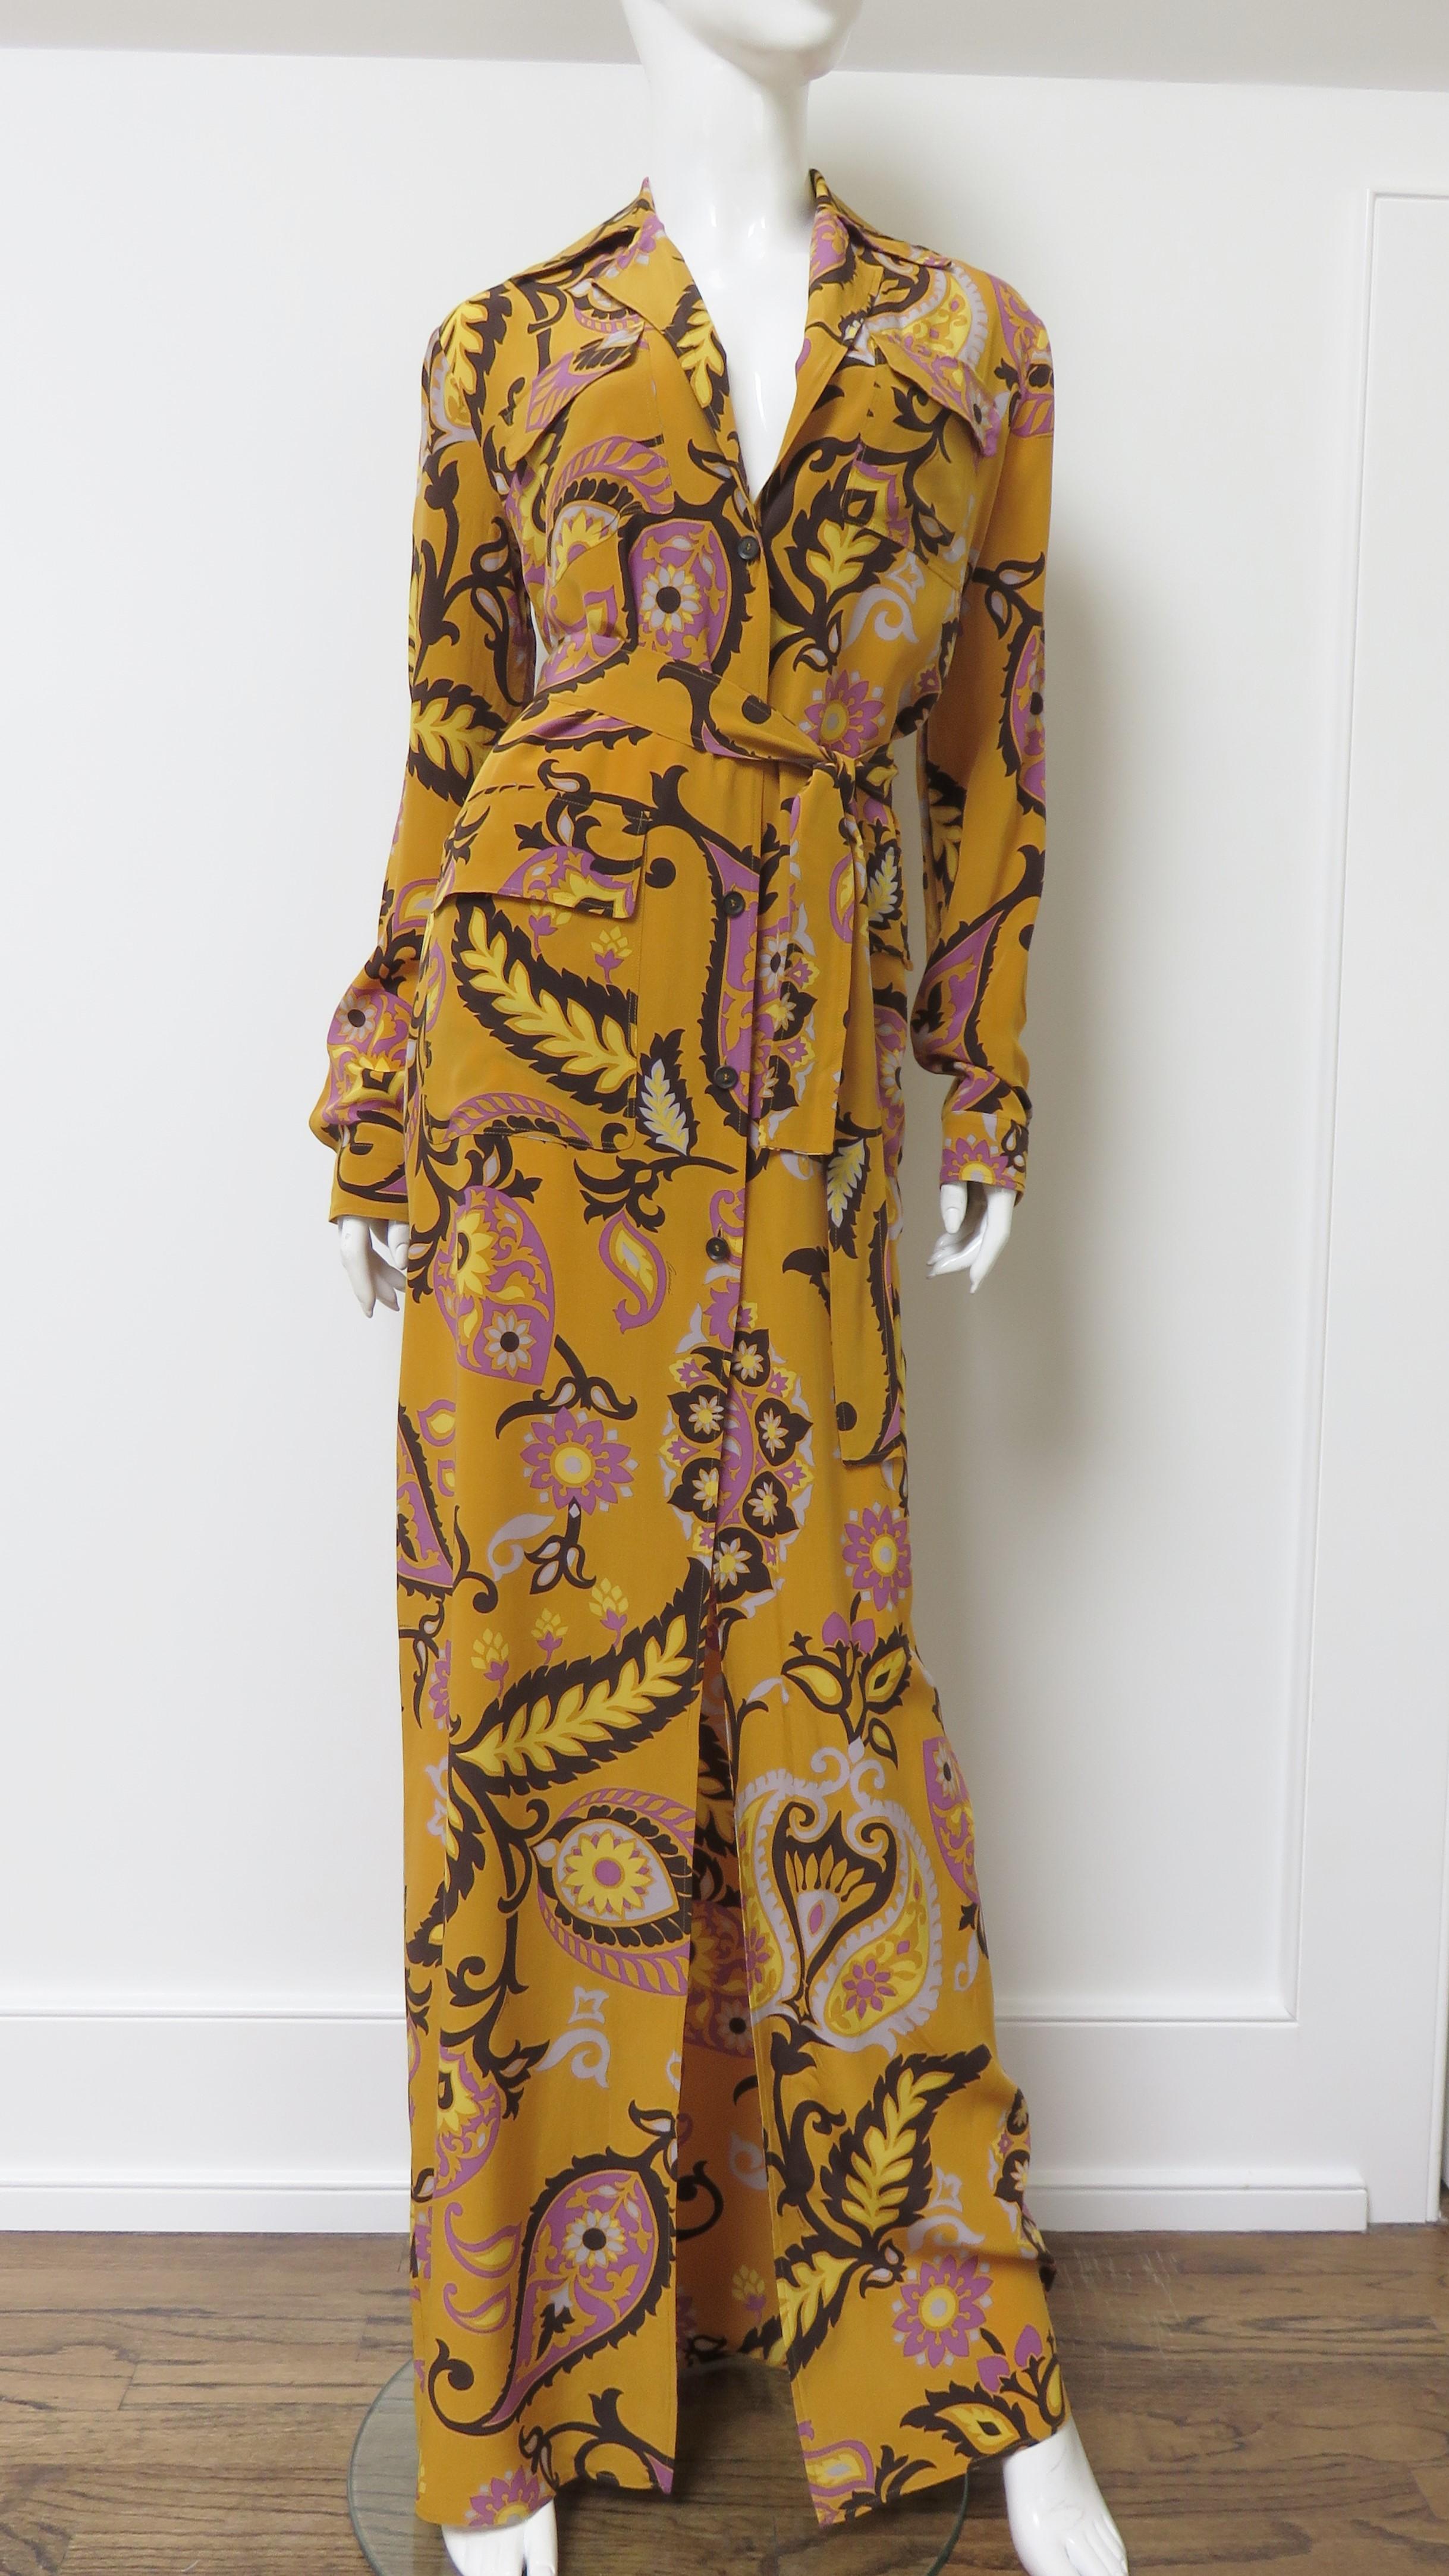 Gucci Silk Shirt Maxi Dress S/S 2011 In Excellent Condition For Sale In Water Mill, NY